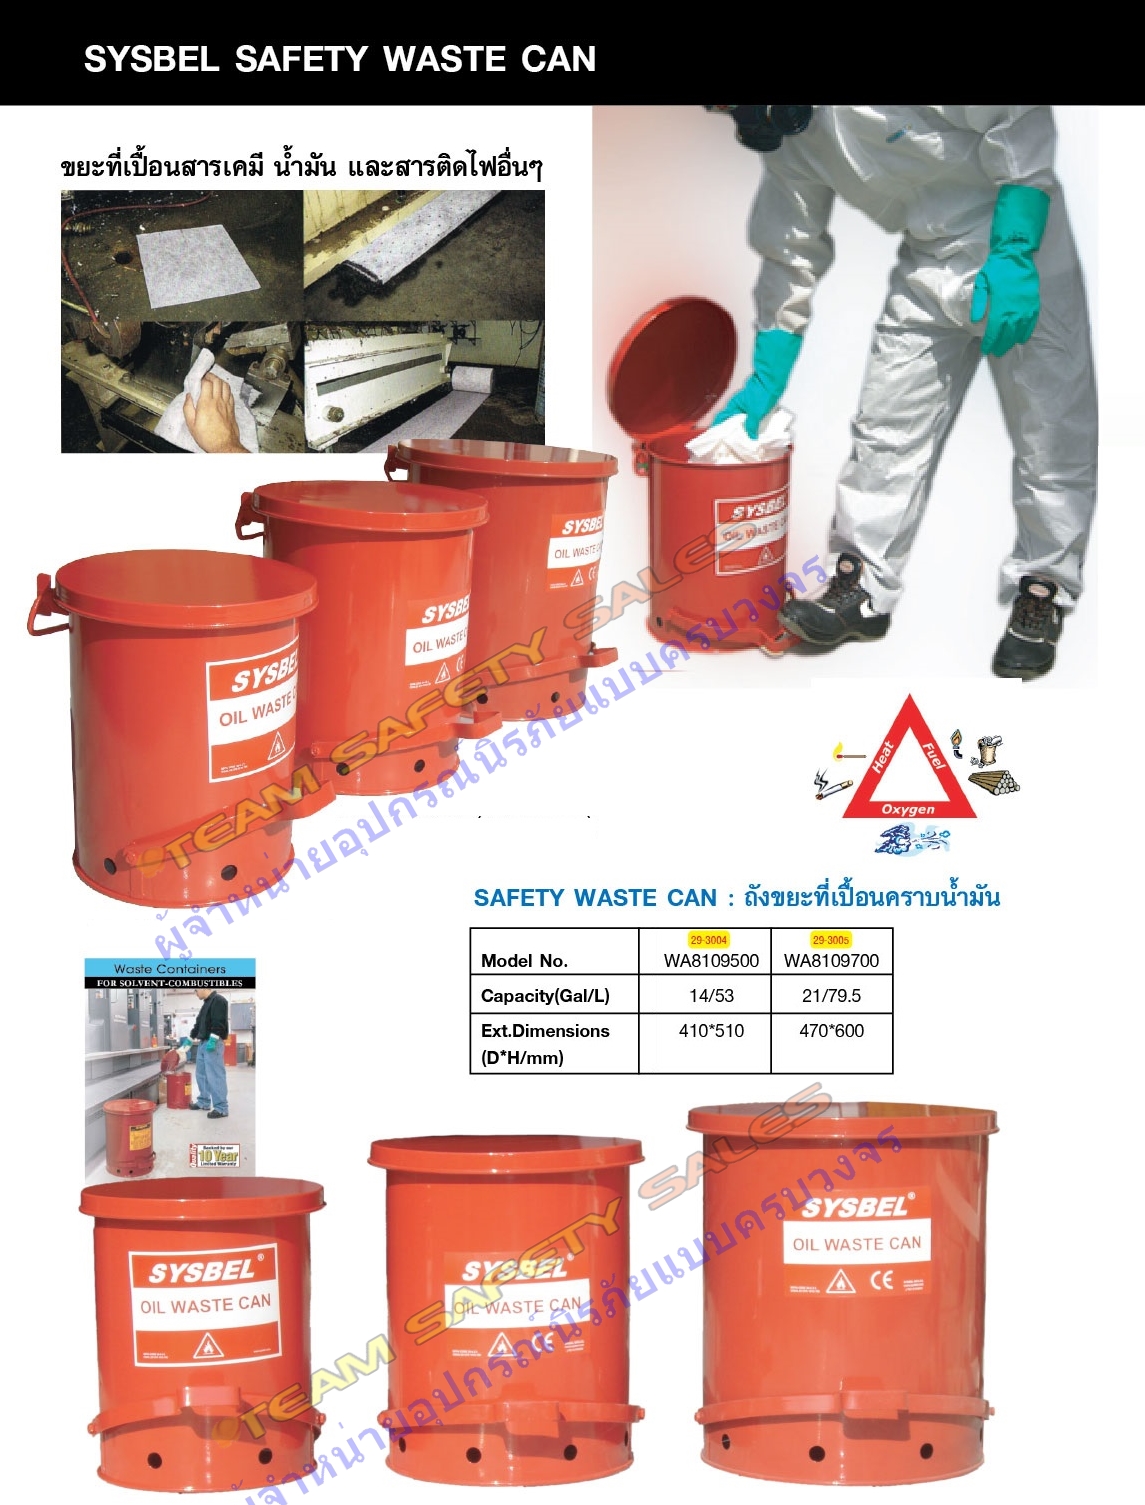 https://www.sysbelthailand.com/wp-content/uploads/2017/08/Sec29-p1-2-safety-waste-can.jpg